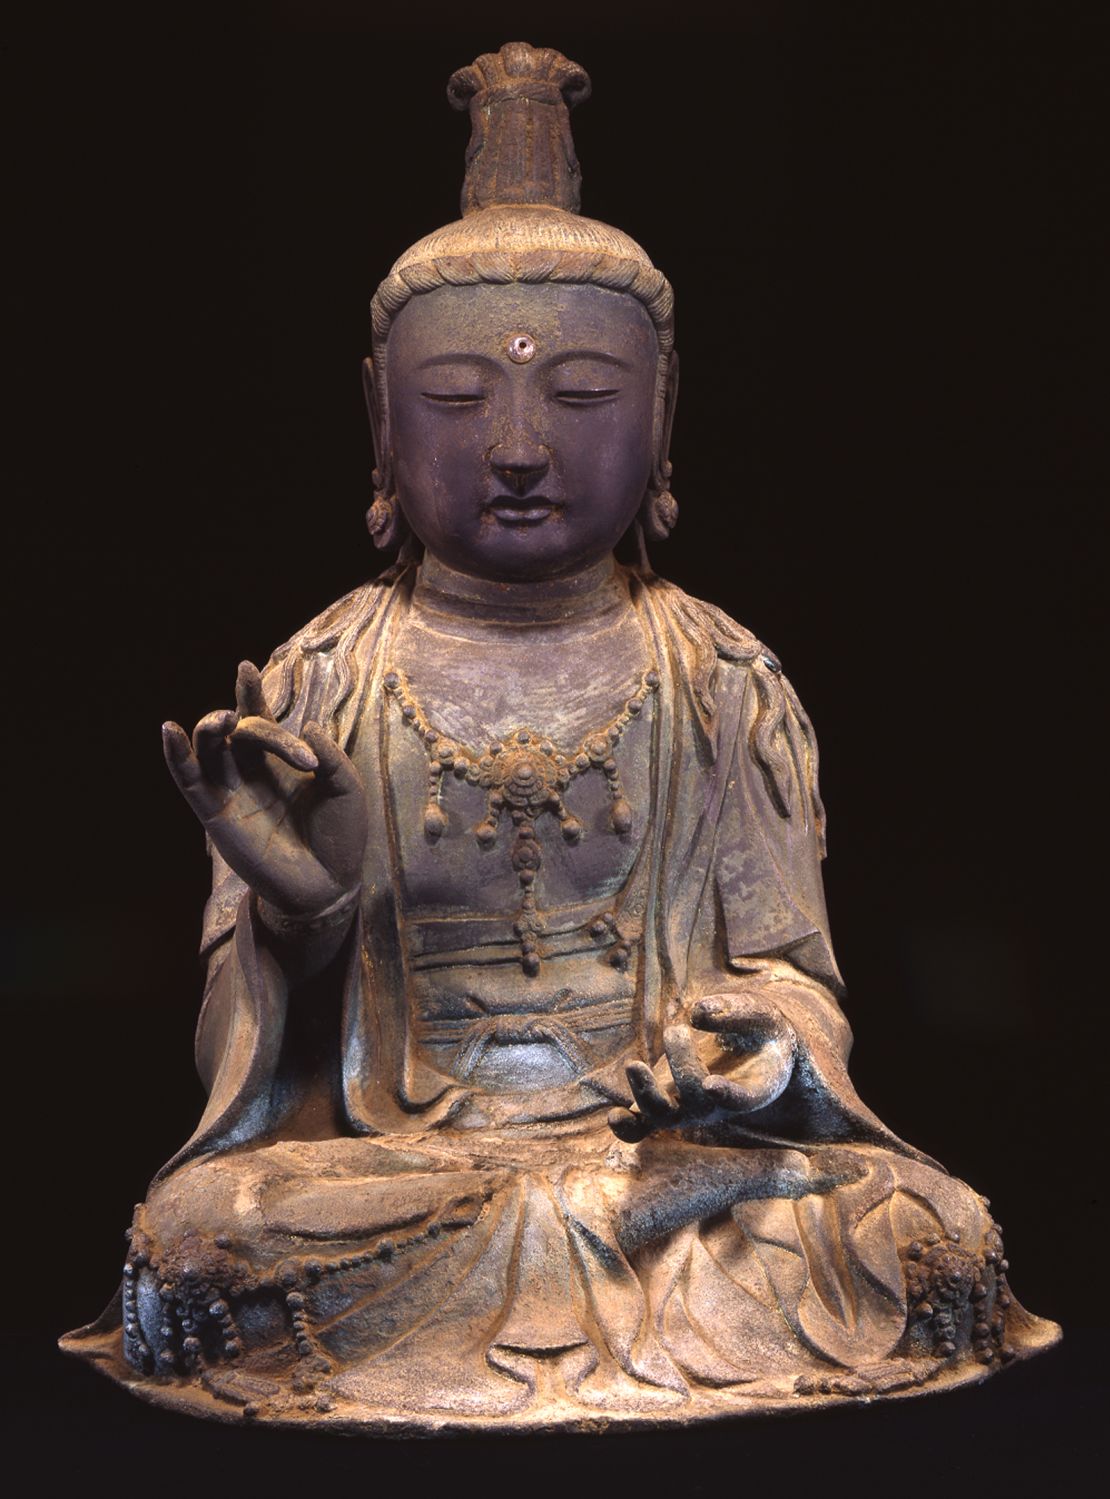 The 20-inch gilt bronze statue was stolen from a Japanese temple in 2012.